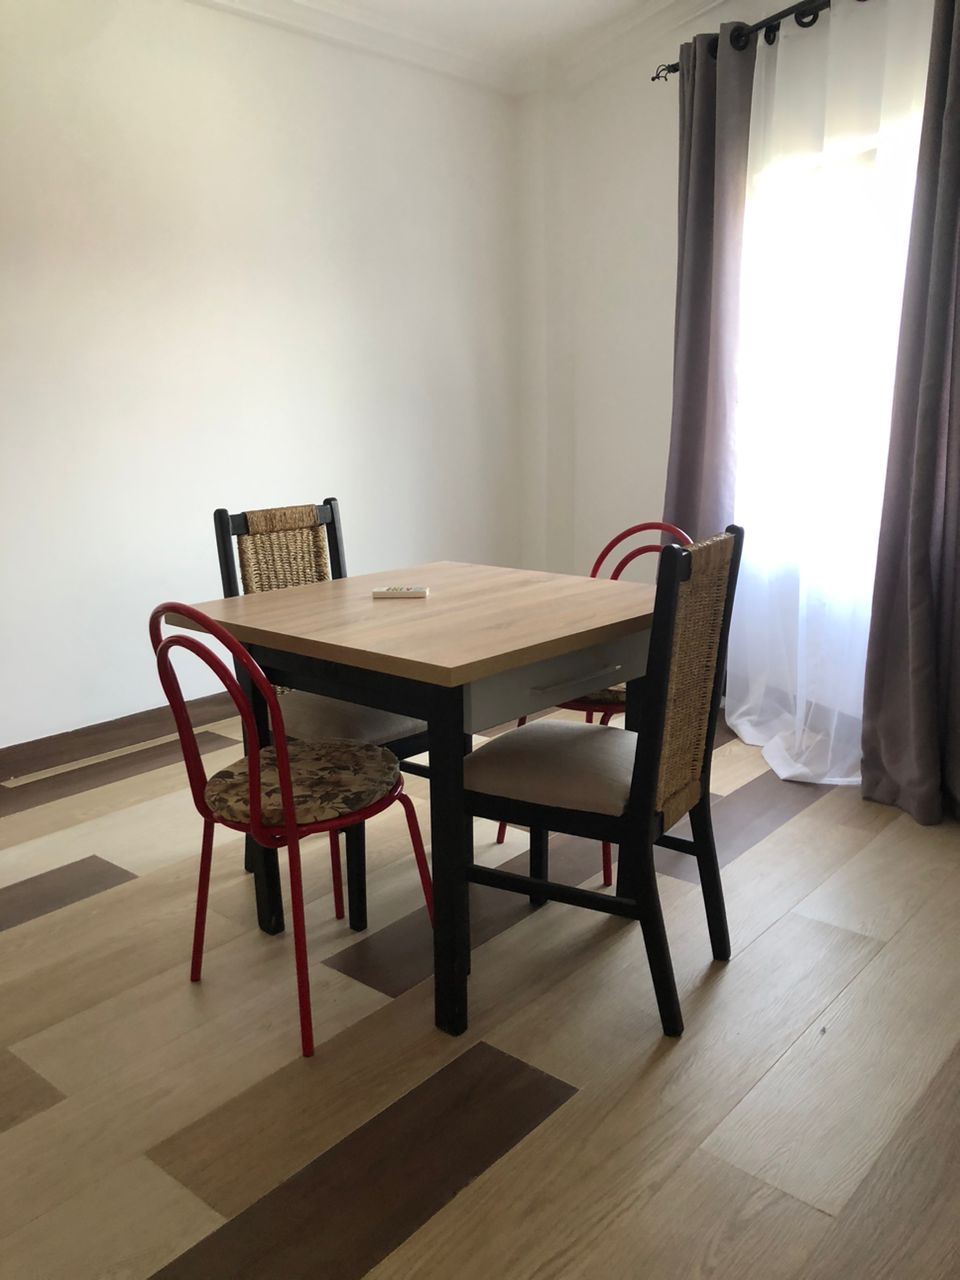 Three (3) Bedroom Furnished & Unfurnished Apartments for Rent at Tse Addo